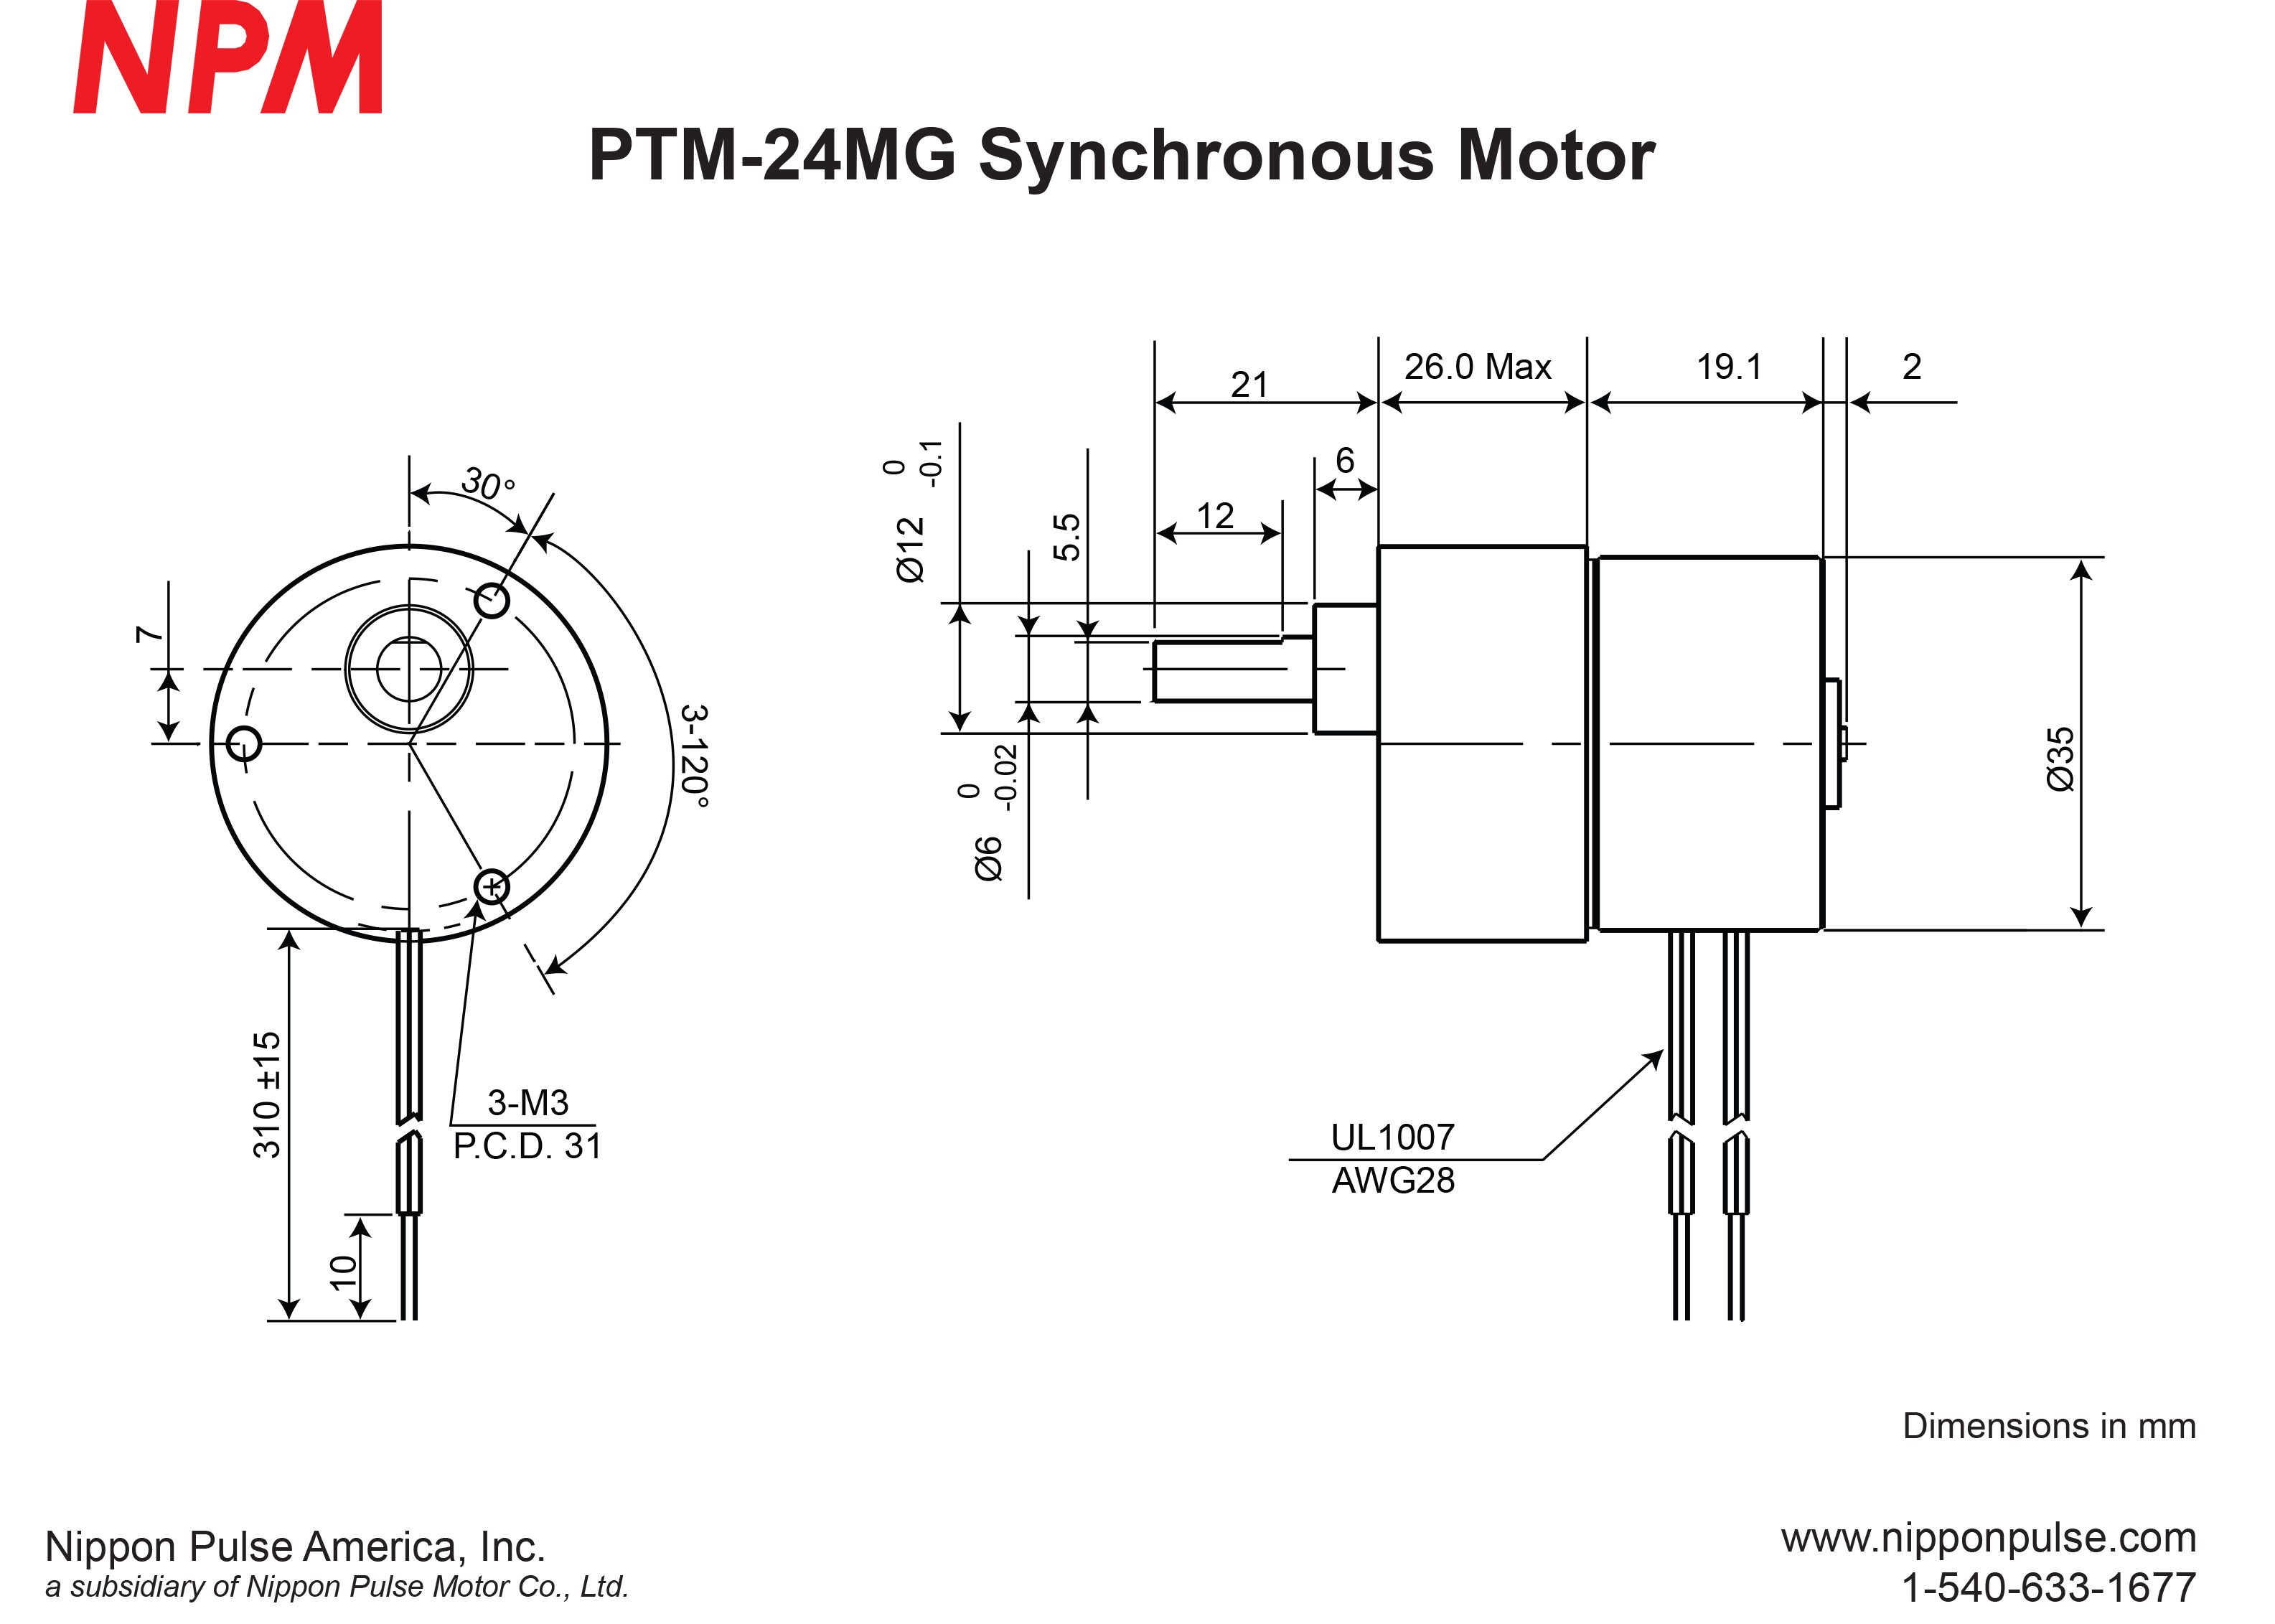 PTM-24MG(1/300) system drawing